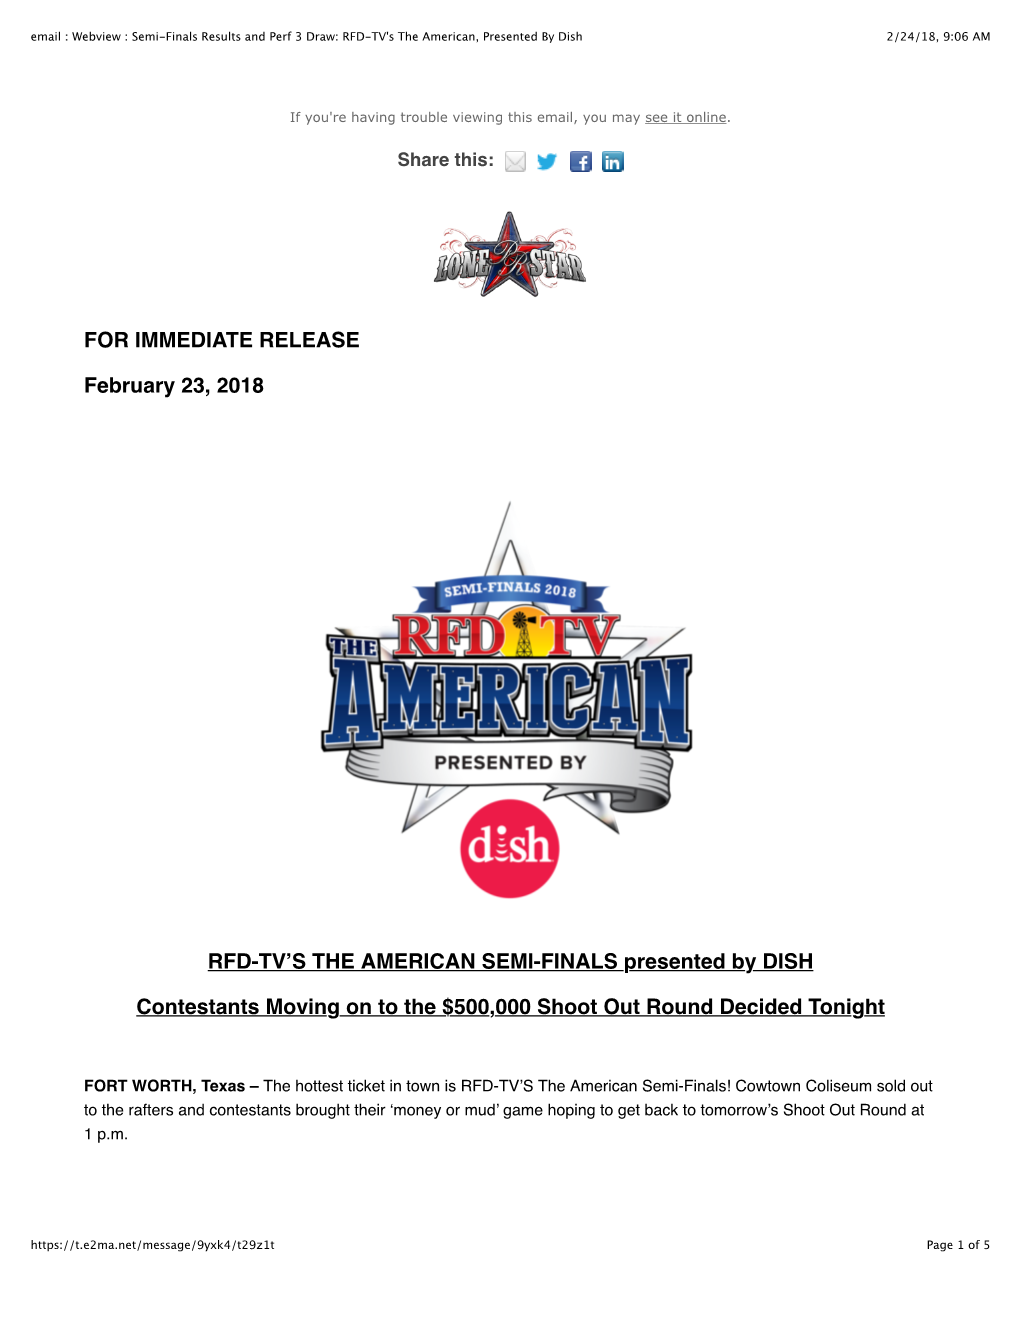 Email : Webview : Semi-Finals Results and Perf 3 Draw: RFD-TV's the American, Presented by Dish 2/24/18, 9:06 AM